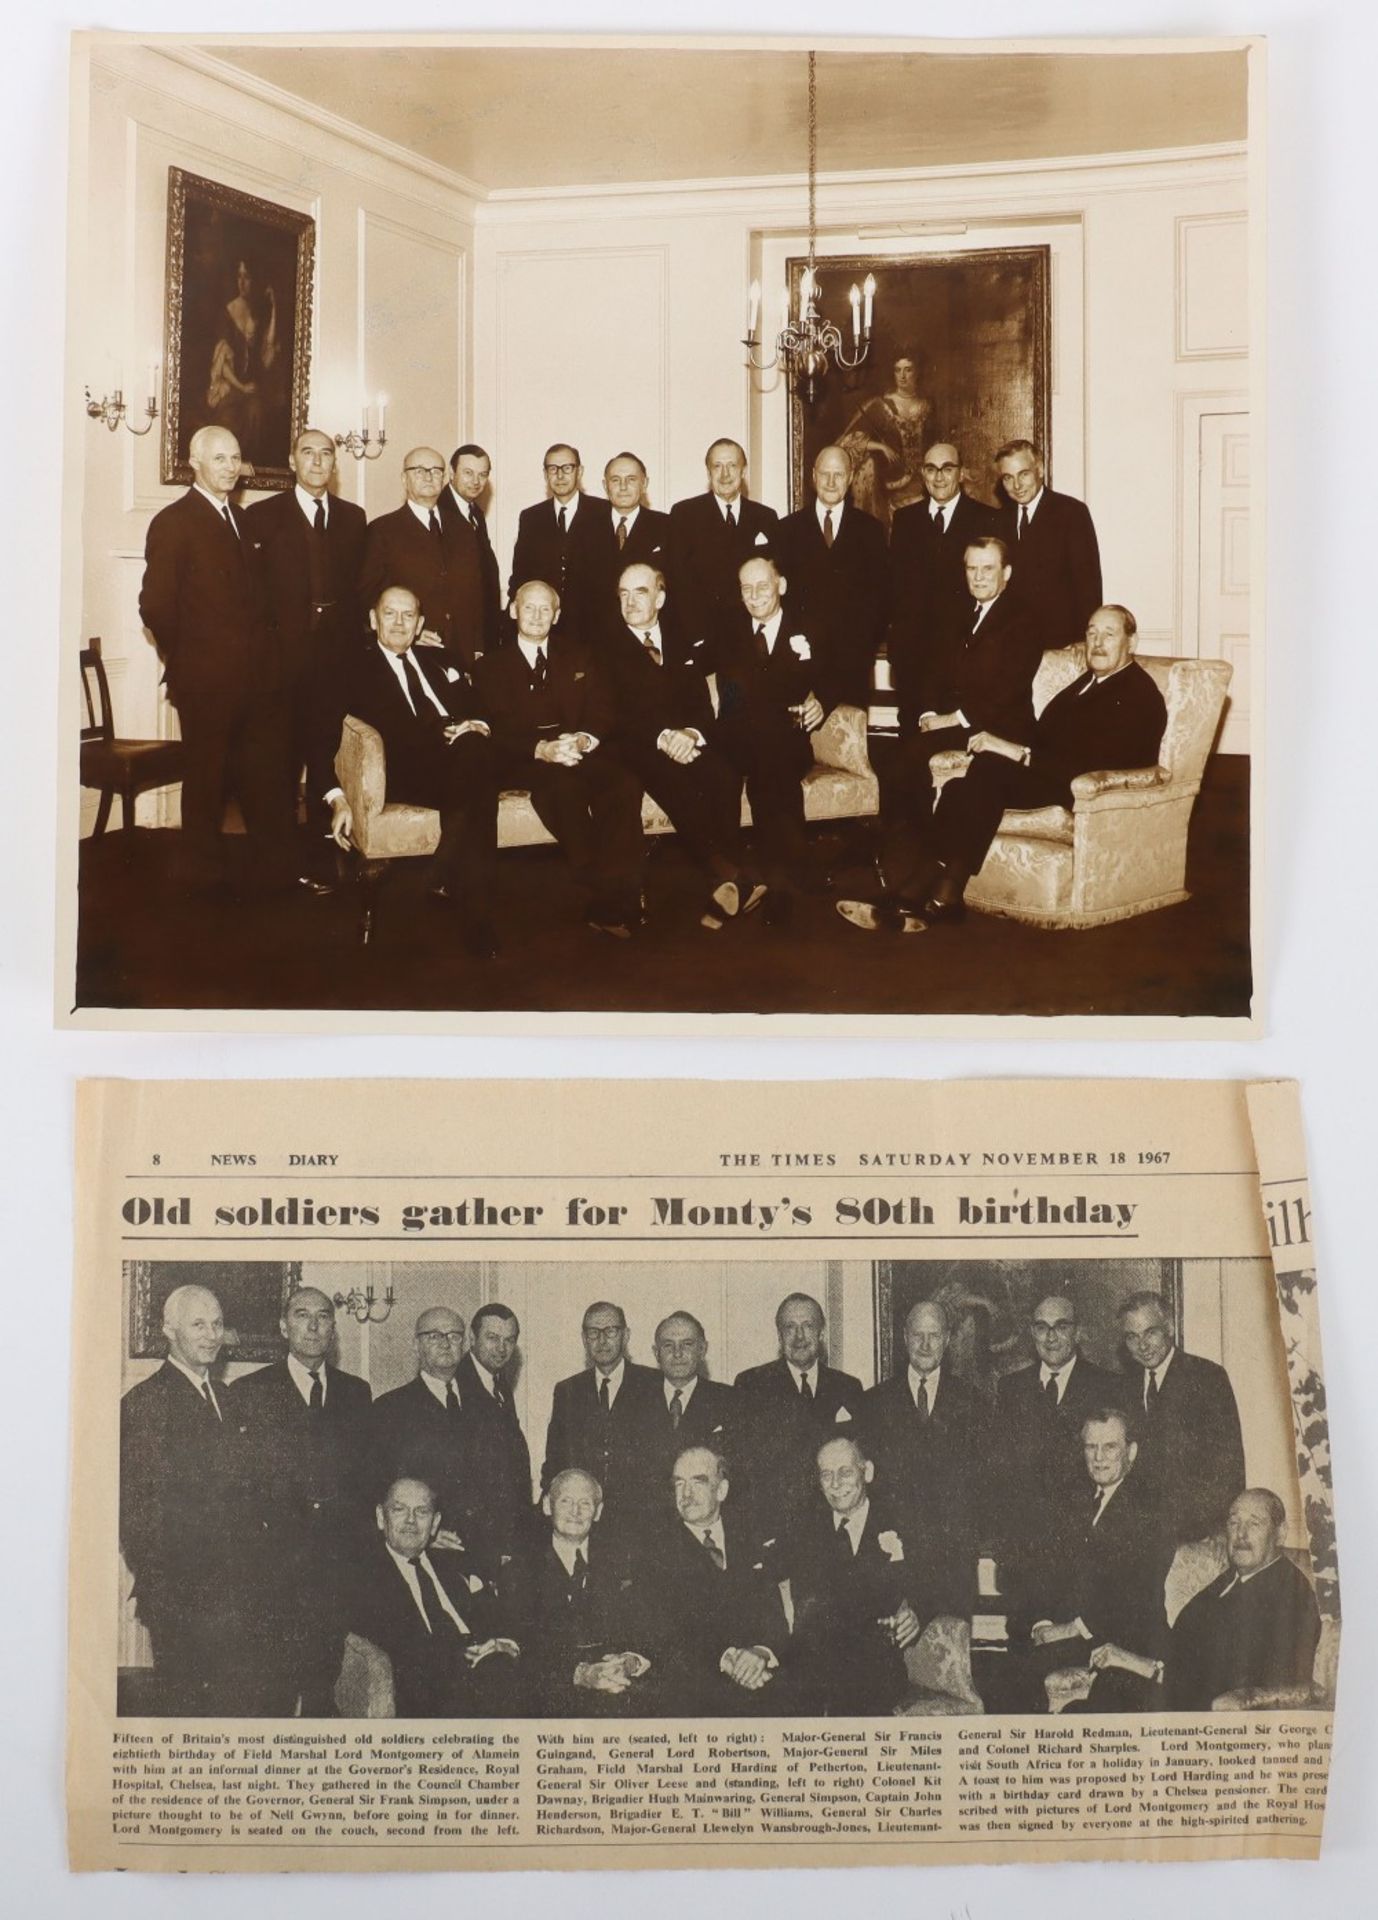 Important Original Photograph of "Old Soldier's gather for Monty's 80th Birthday" November 1967